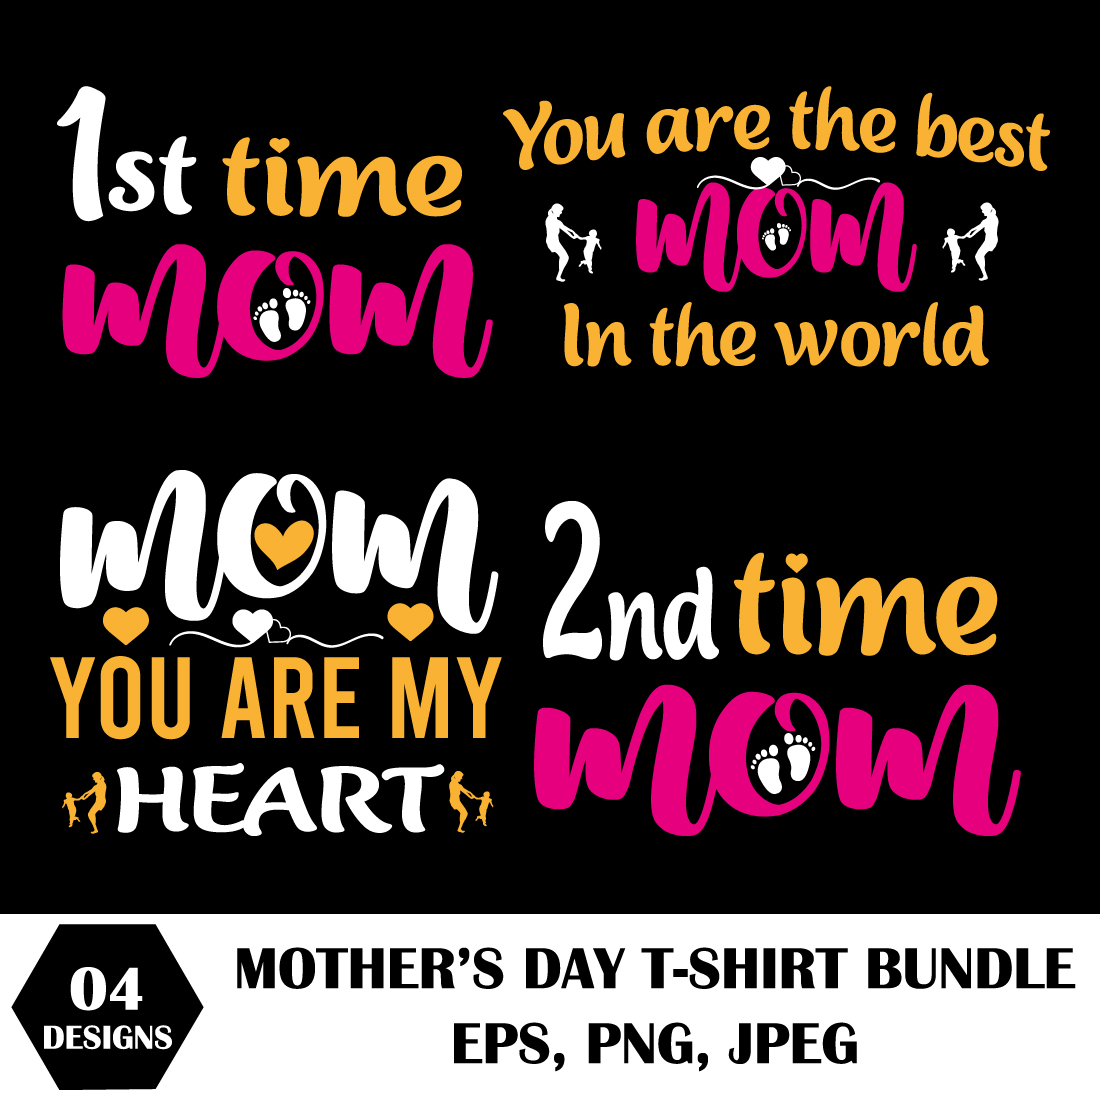 Mother's day t-shirt bundle cover image.